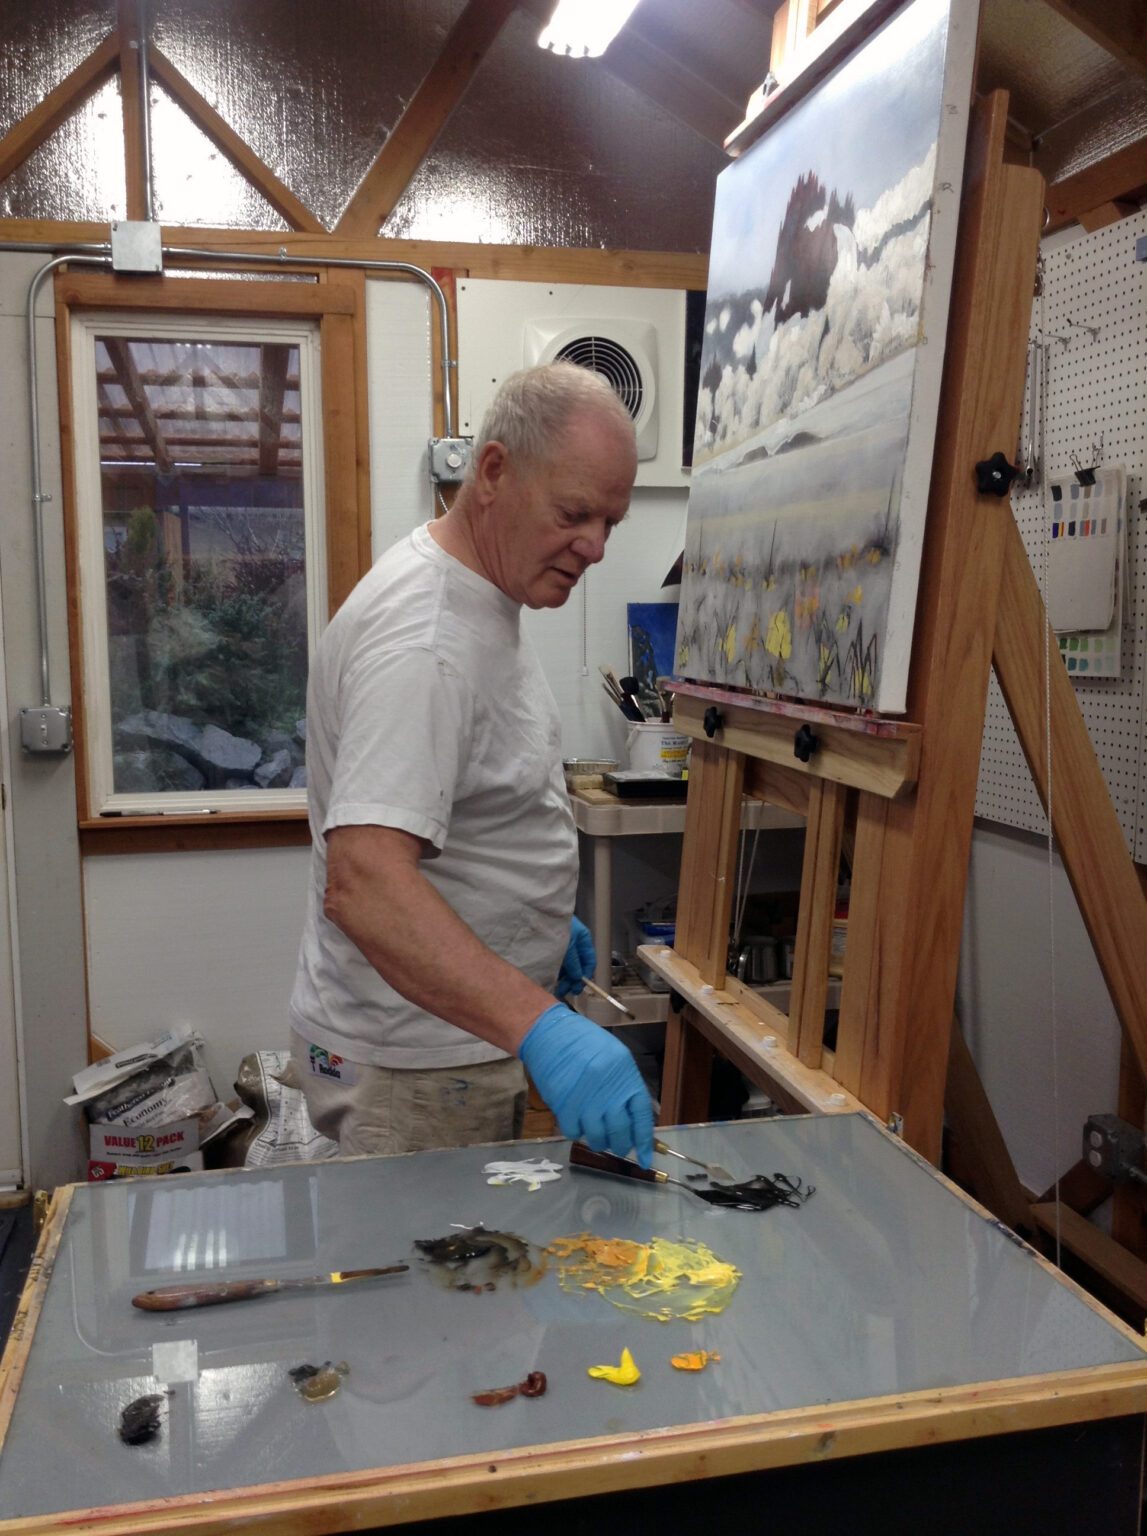 See Gene Jaress work on his limited-edition woodcut prints at his Mount Vernon studio during the 18th annual NW Art Beat Studio Tour taking place from 10 a.m. to 6 p.m. July 16–17 at locales throughout Skagit County. The free